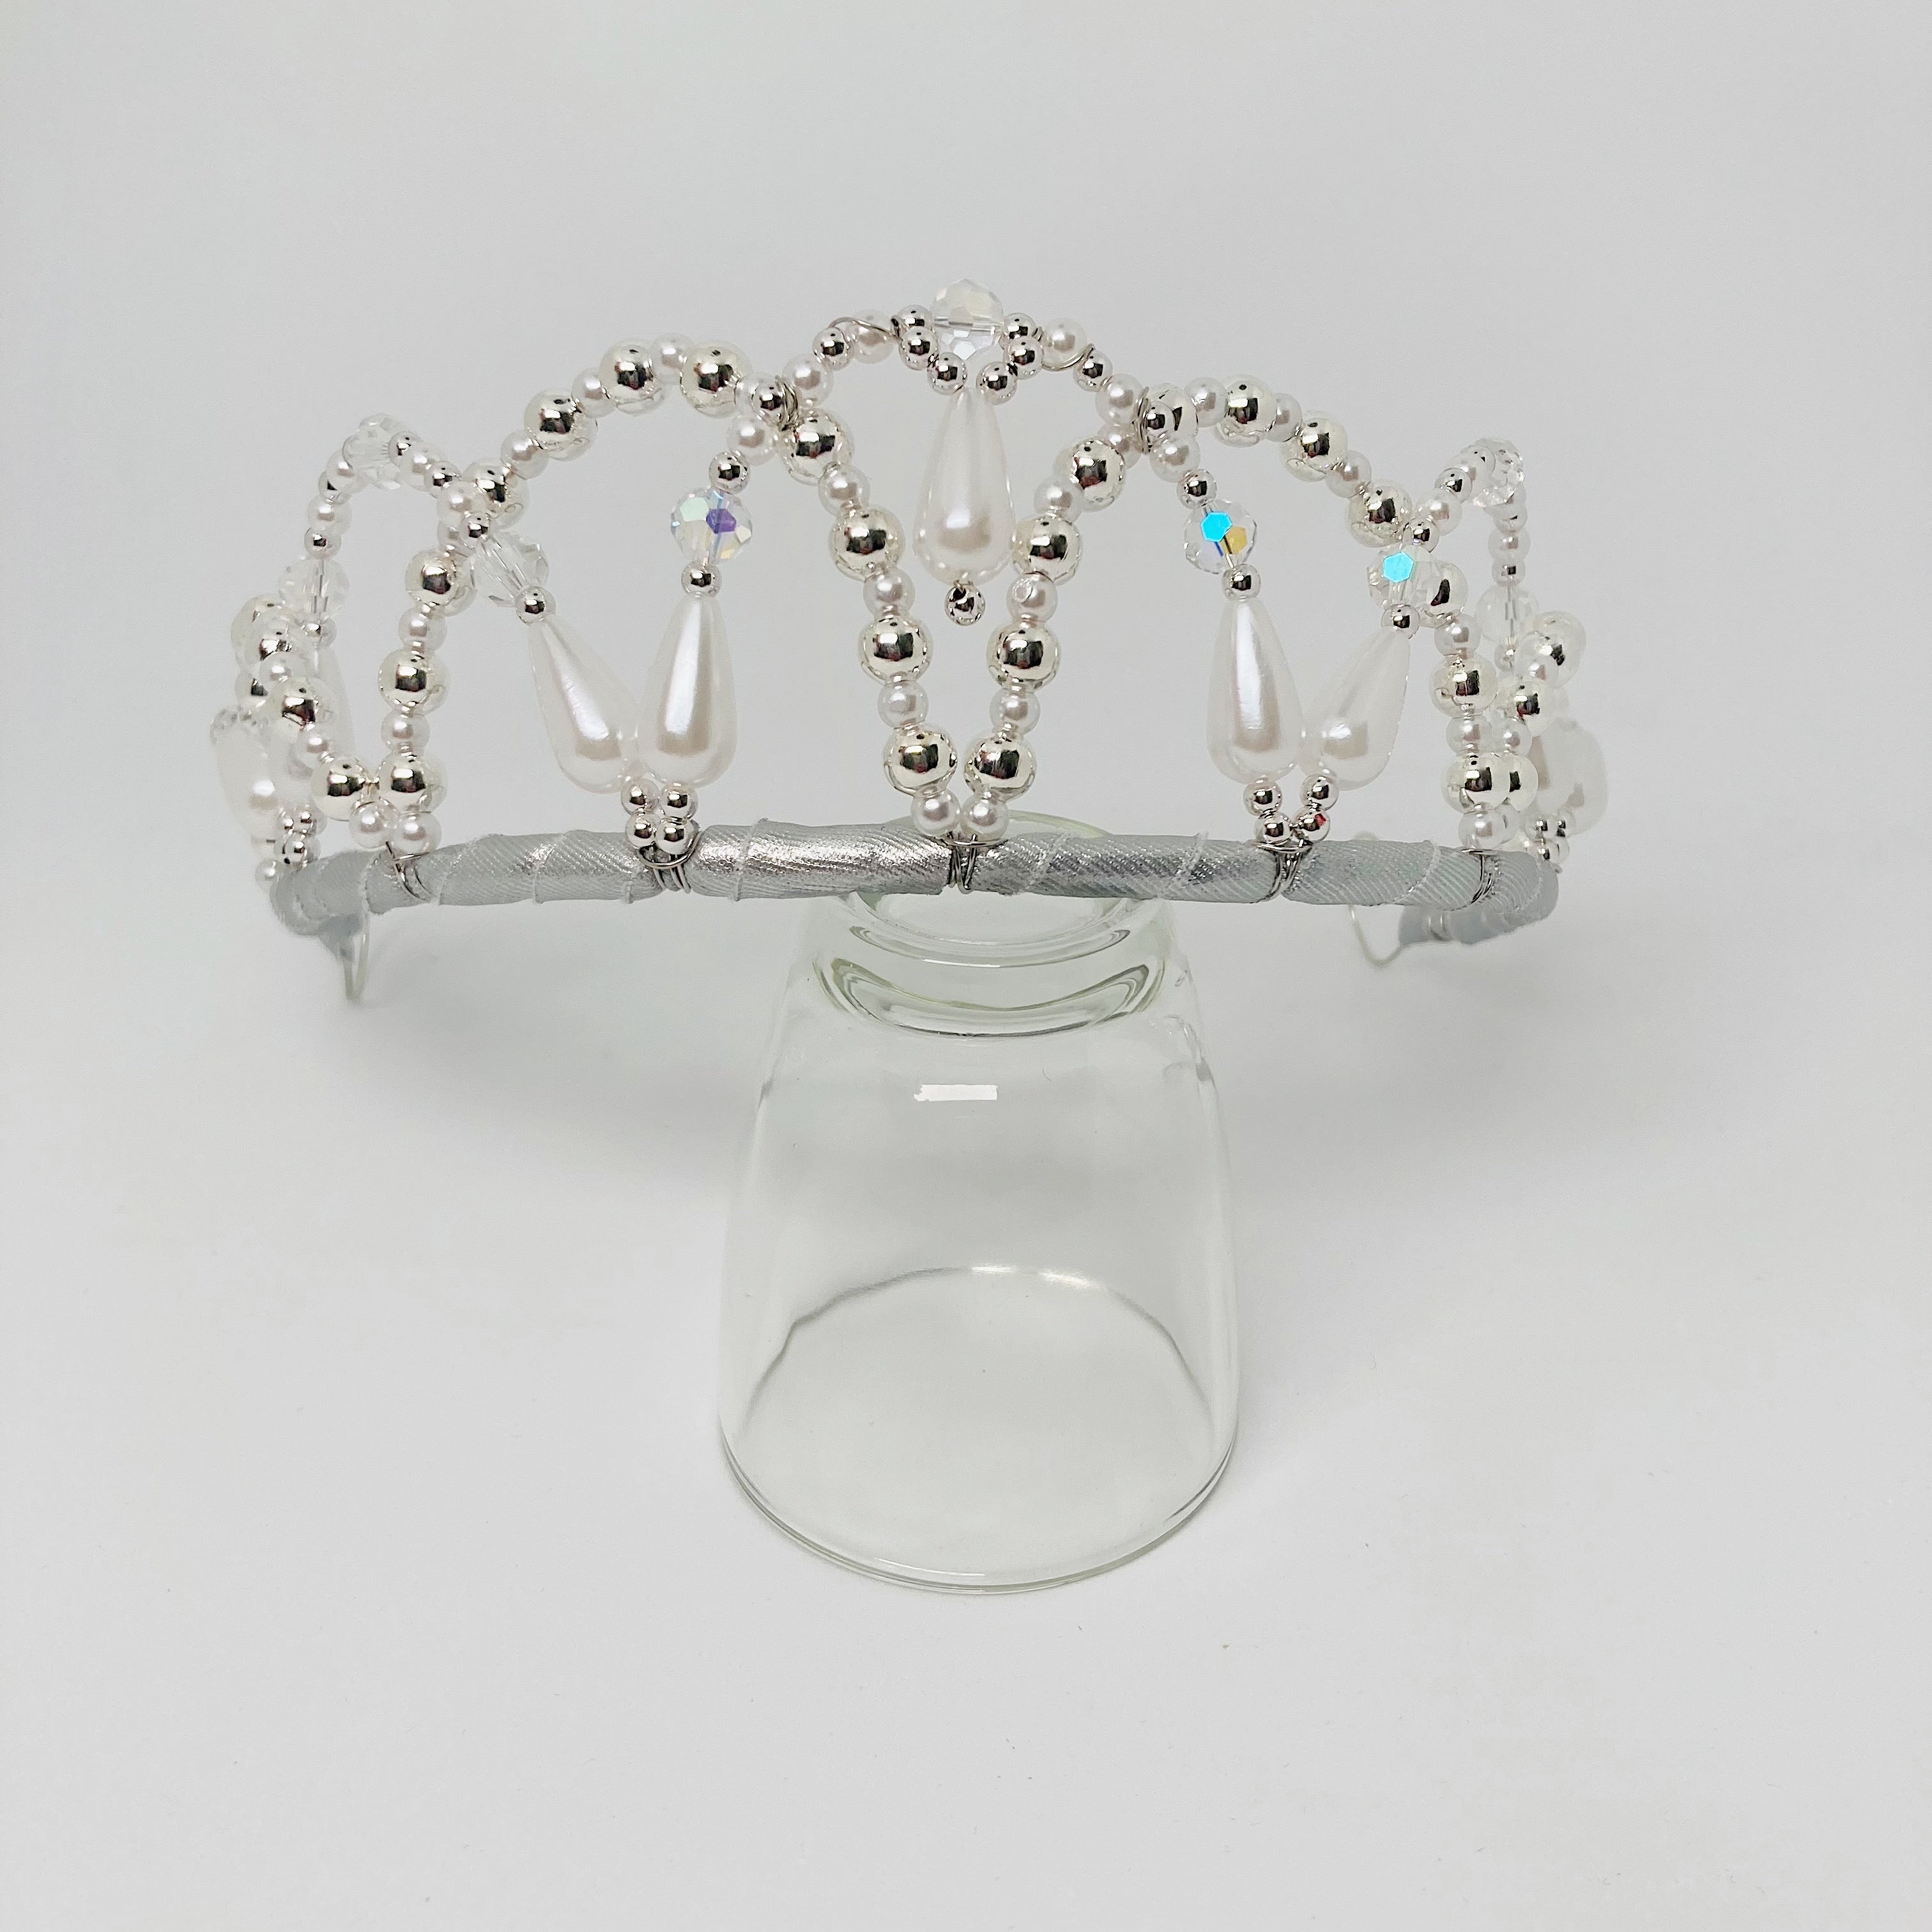 Front view of a tiara embellished with clear crystal, silver and frosted white beads.  The tiara is resting on a clear glass.  